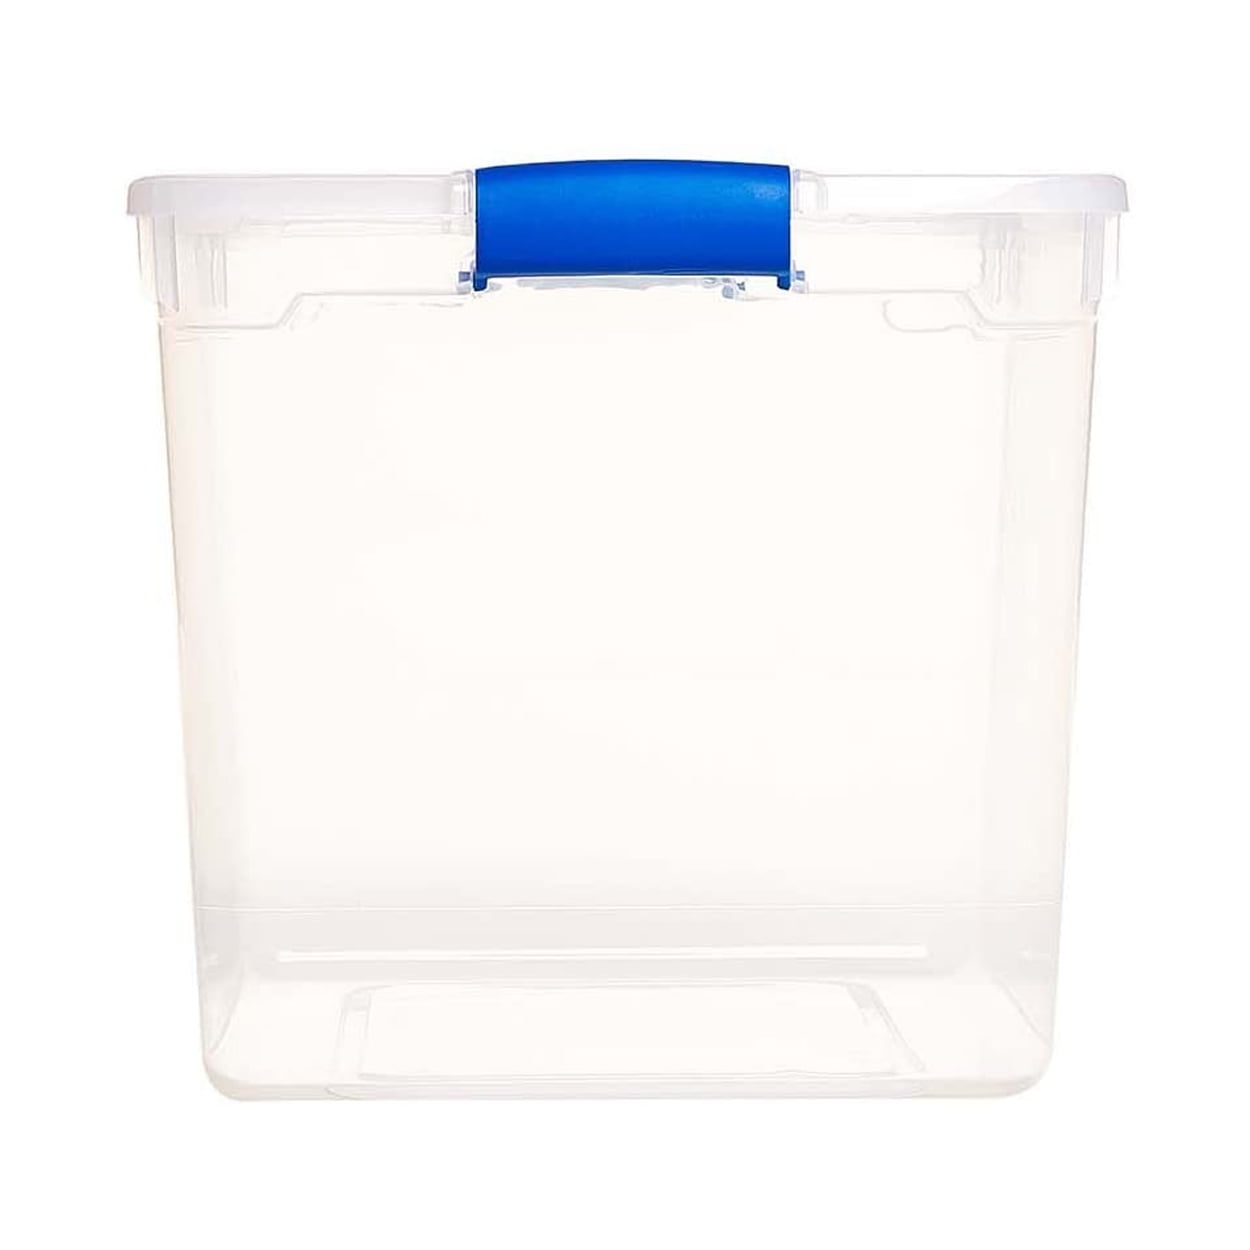 Hawk Bead storage container With handle - 31 Compartments